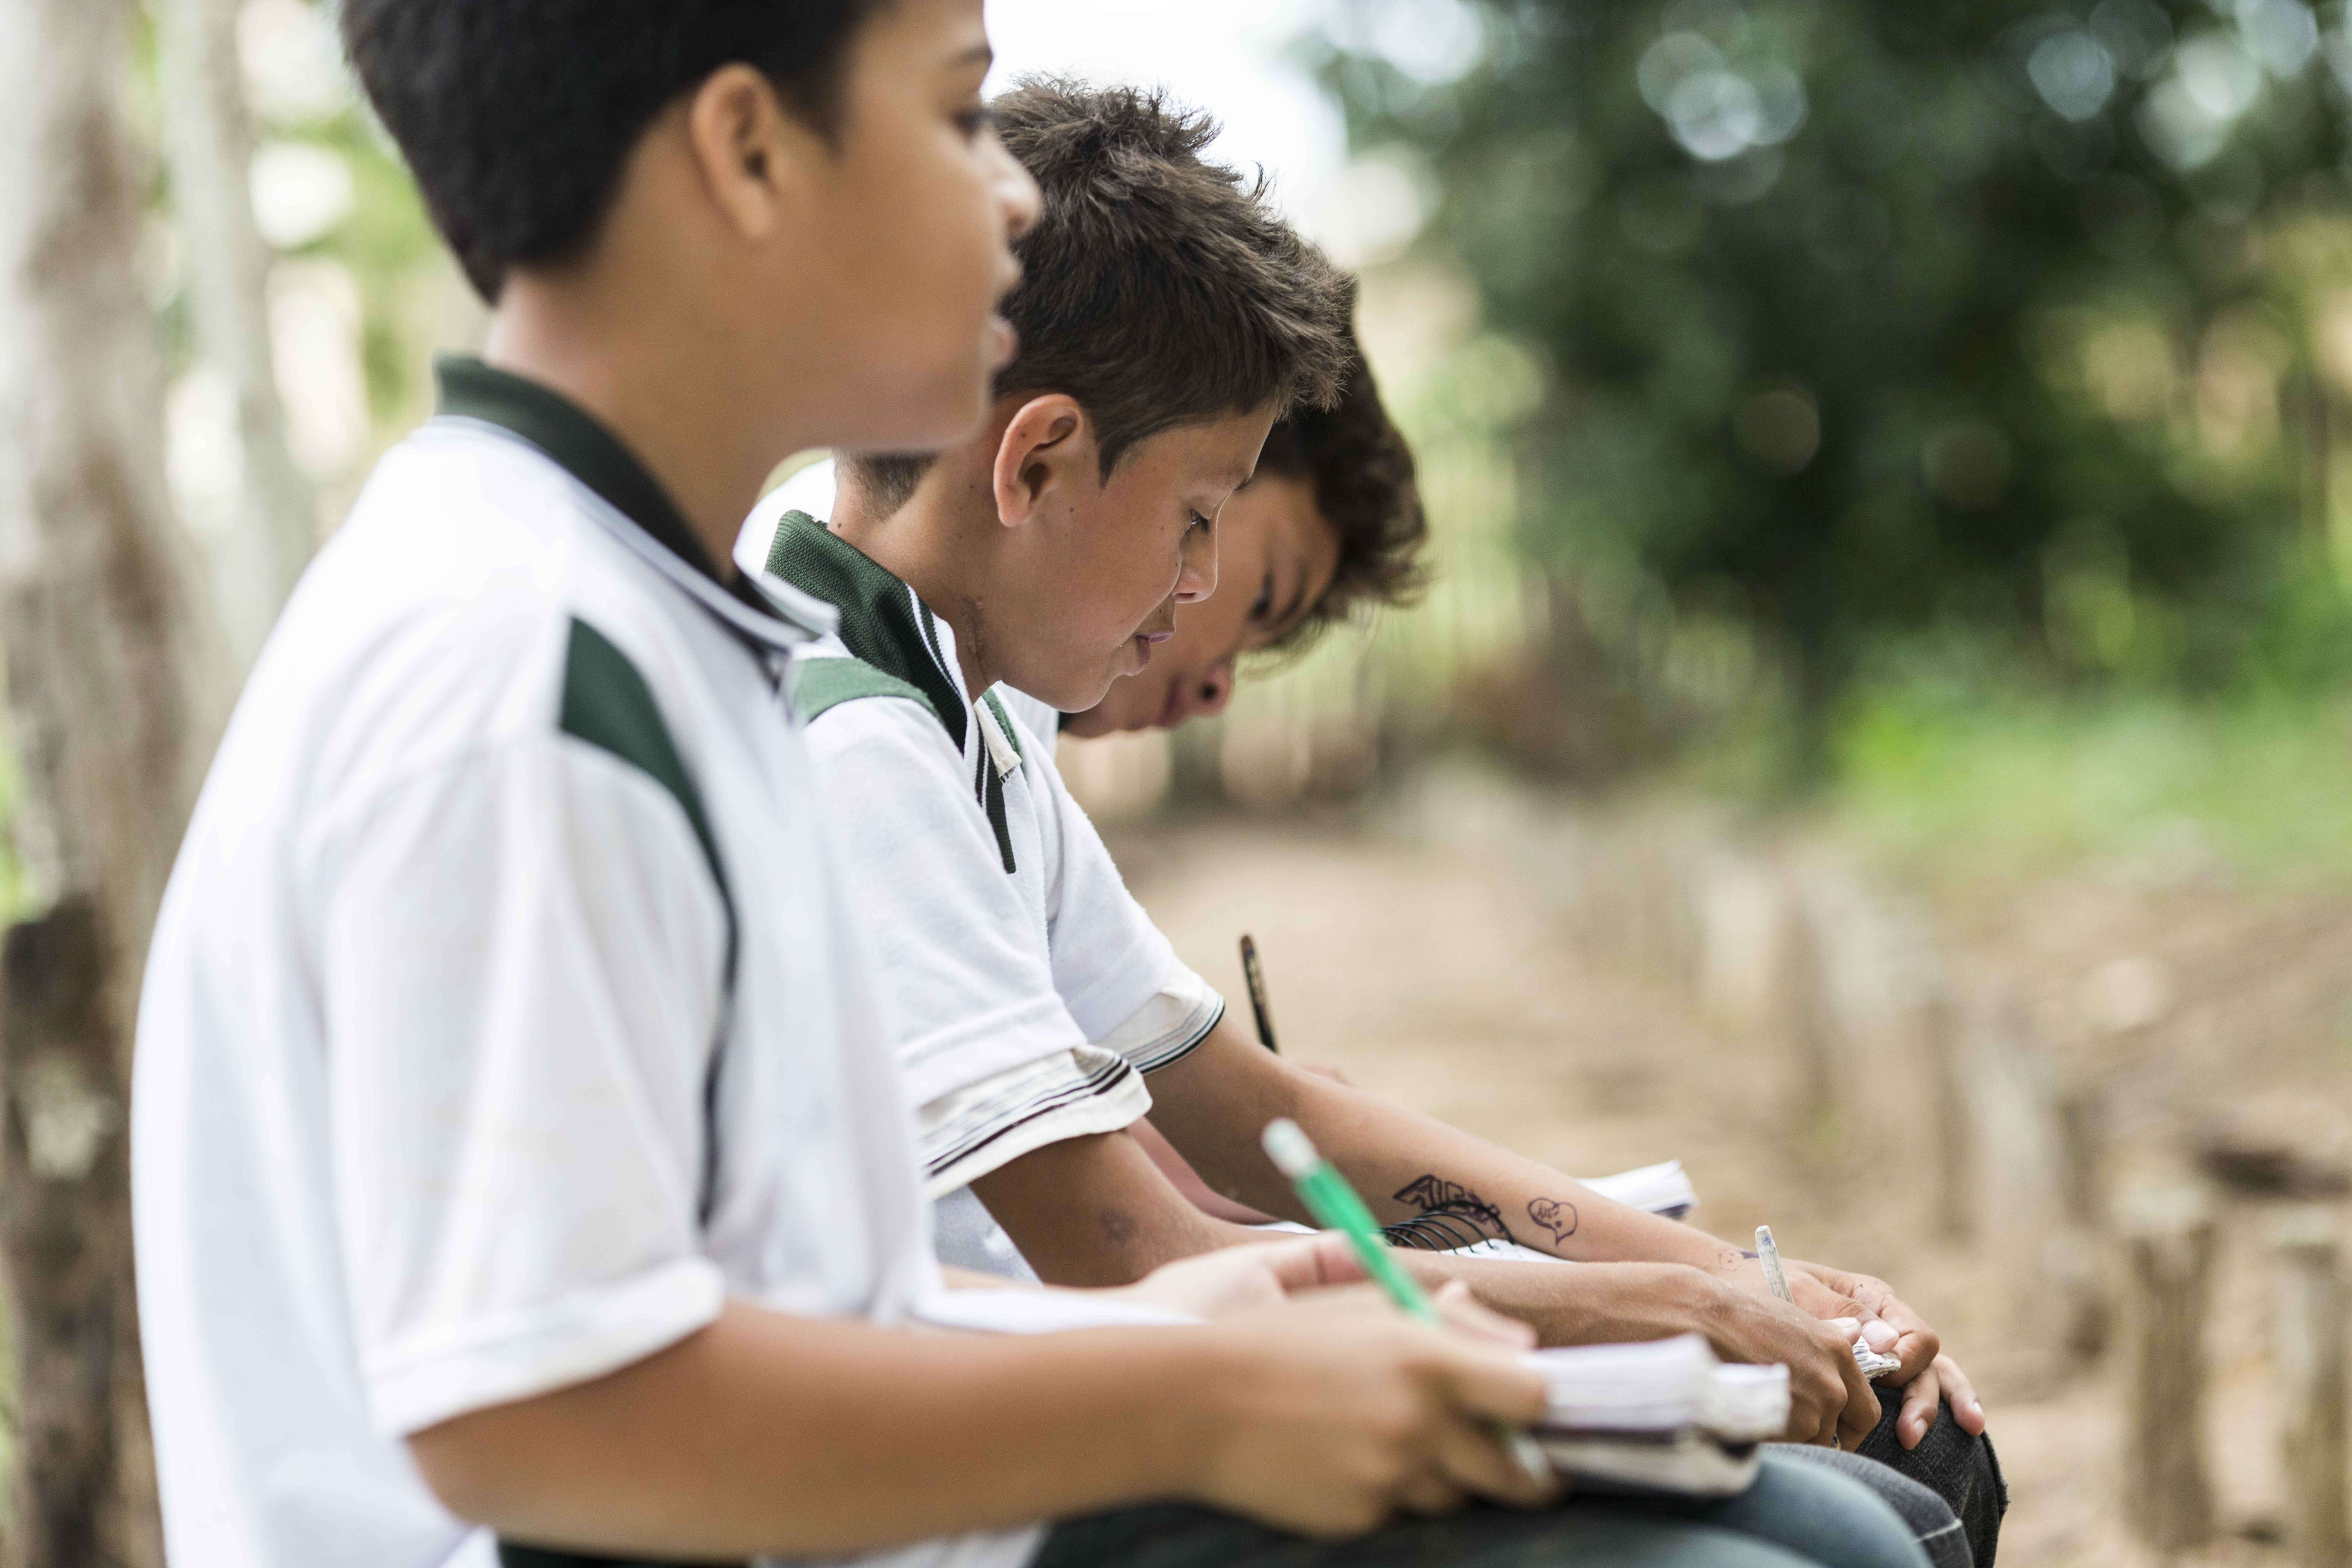 Schoolchildren visiting the Nutrilite Farm in Brazil write in their notebooks by hand. Developing the habit of handwriting and doodling in children can help stimulate young minds. Ubajara, Brazil, 2014.